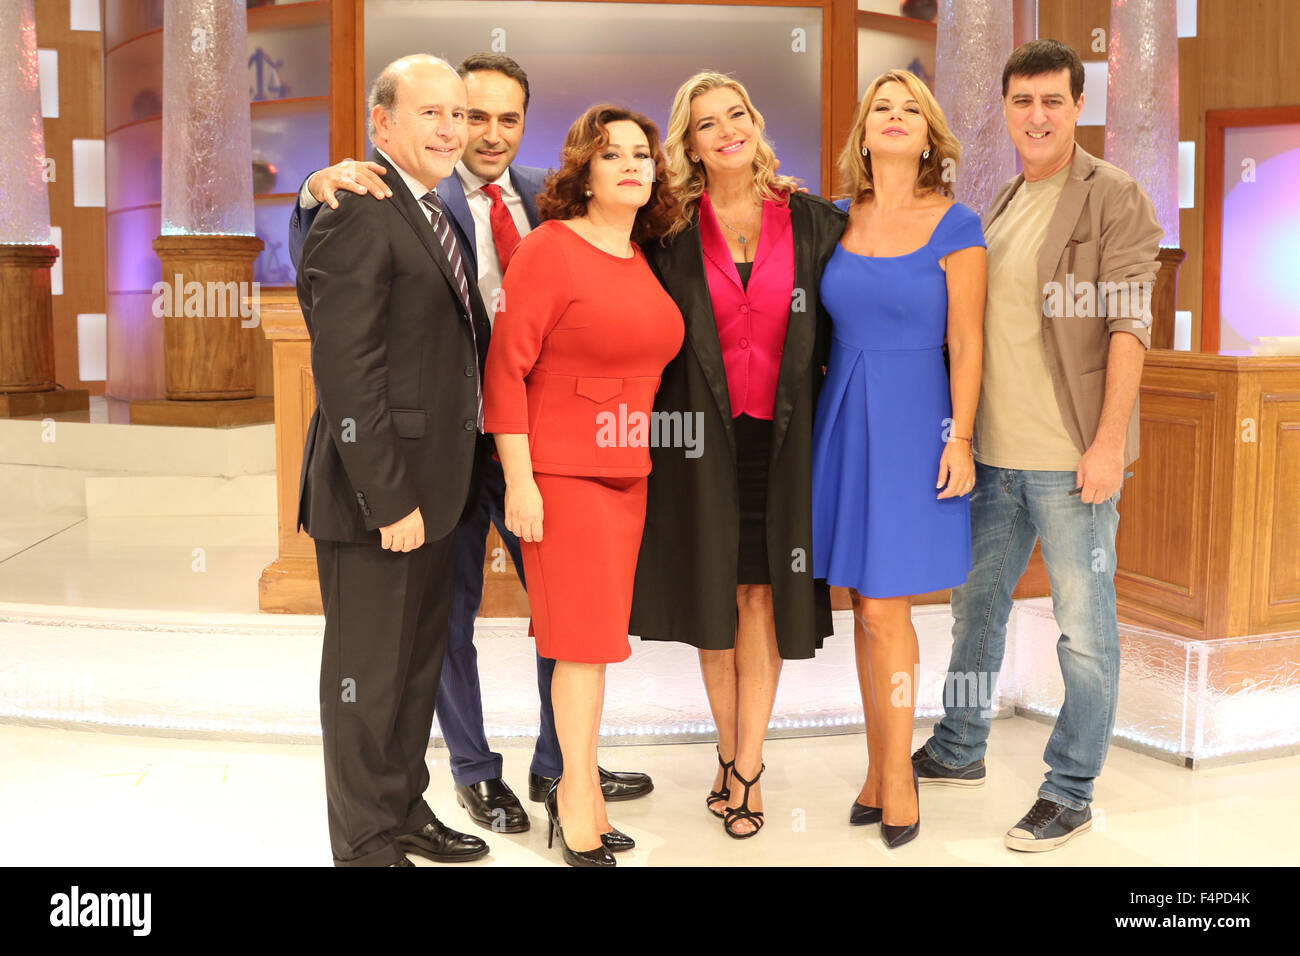 Naples, Italy. 21st Oct, 2015. The court show weblog Rai1 led by Monica Leofreddi (2R) with the other celebrities during transmission, 'Right or Wrong'. Rai 1 is the flagship television channel of Rai, Italy's national public service broadcaster, and the most watched television channel in the country. Credit:  Salvatore Esposito/Pacific Press/Alamy Live News Stock Photo